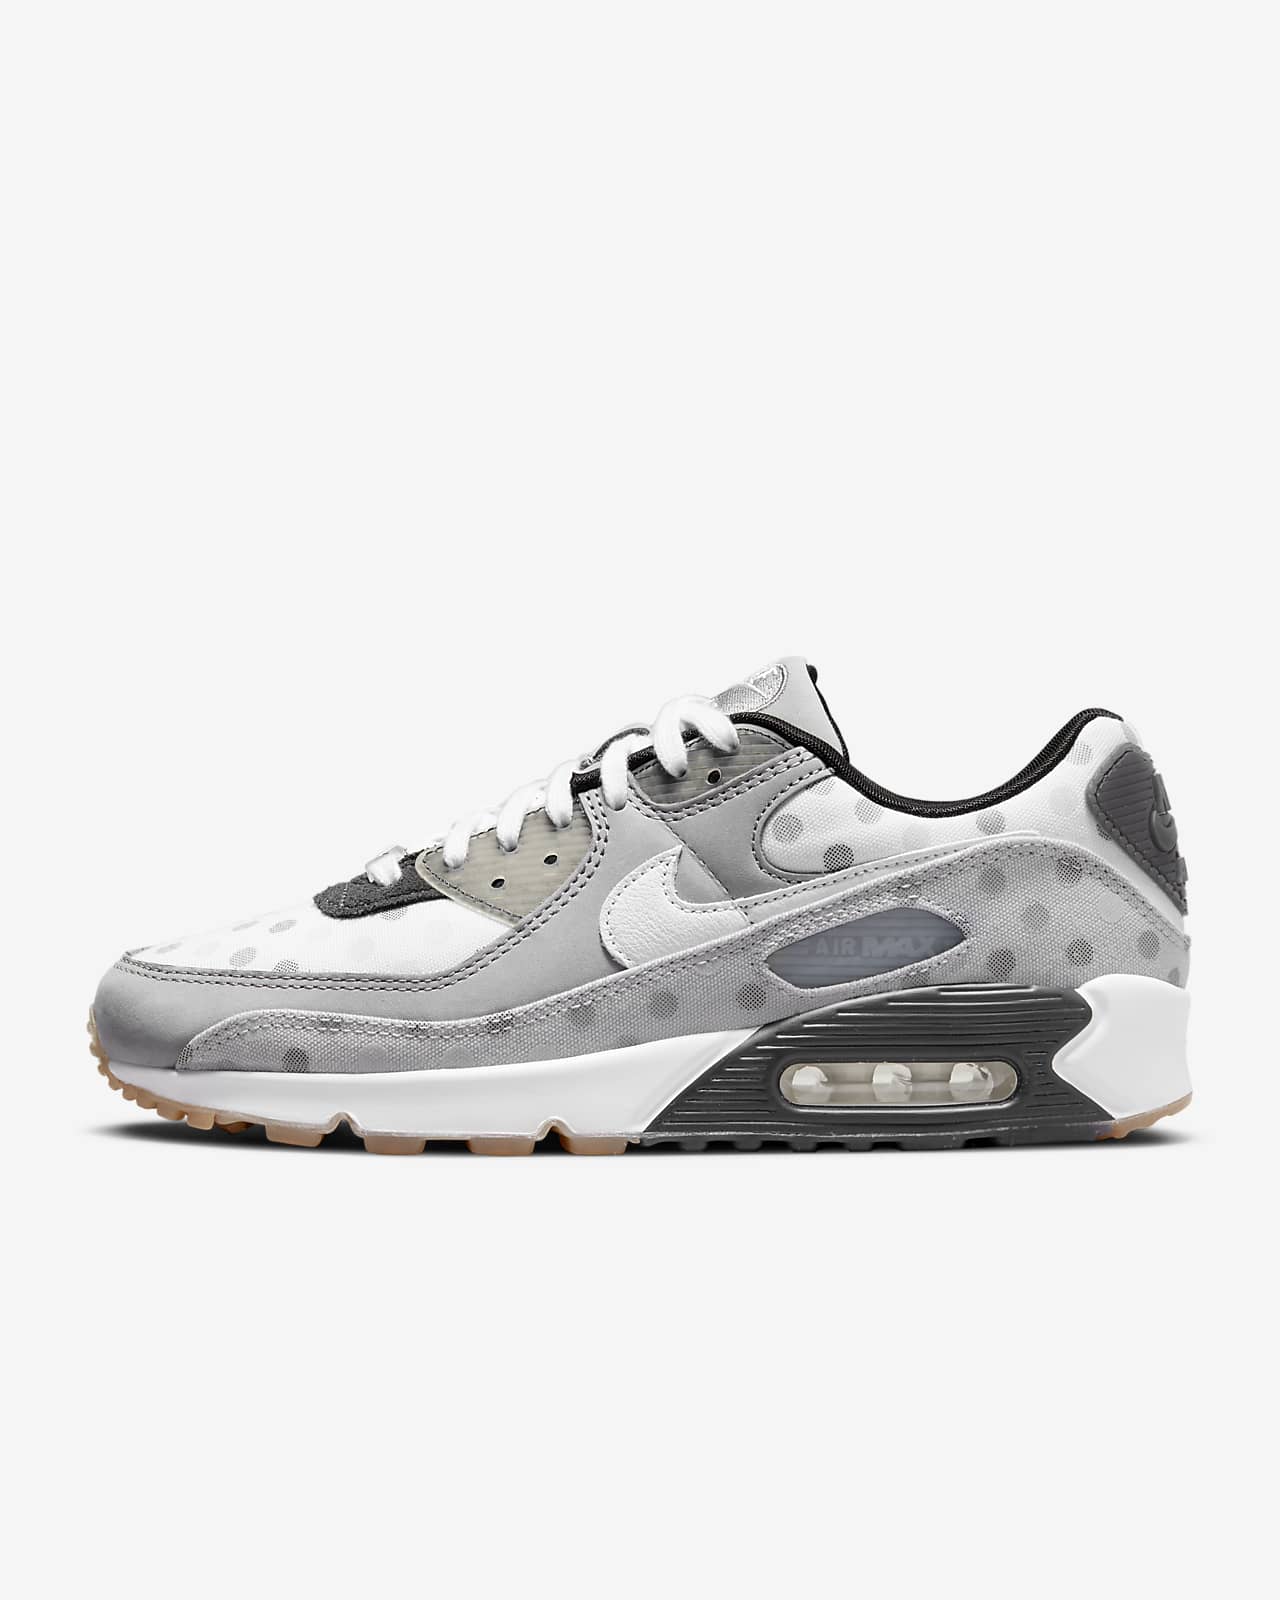 Extreme poverty Rustic Bookkeeper Nike Air Max 90 NRG Men's Shoes. Nike LU